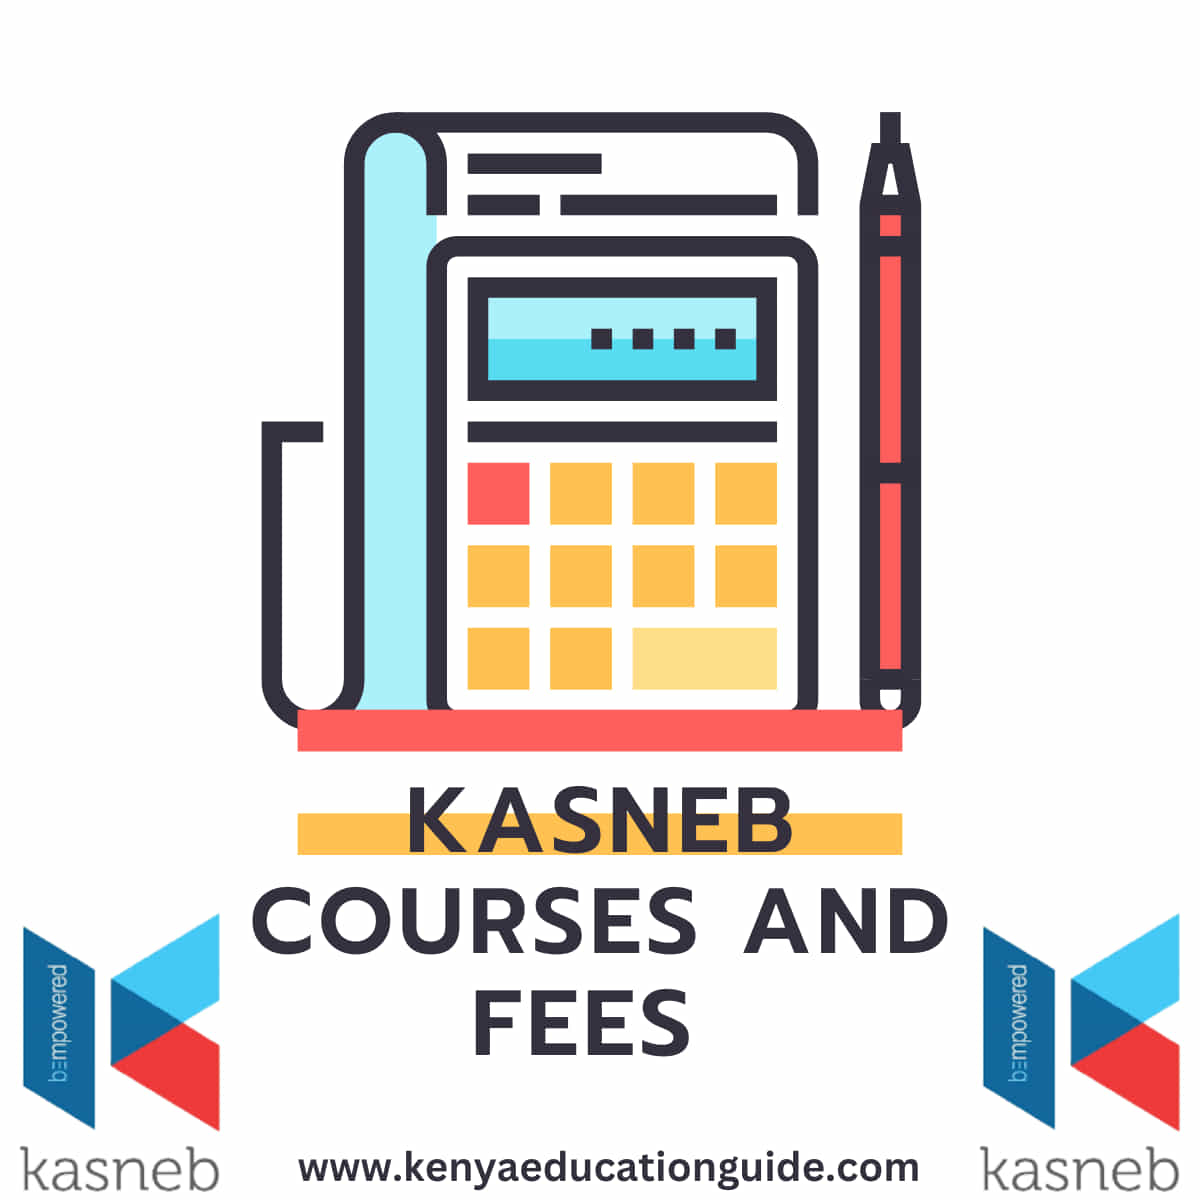 KASNEB courses and fees